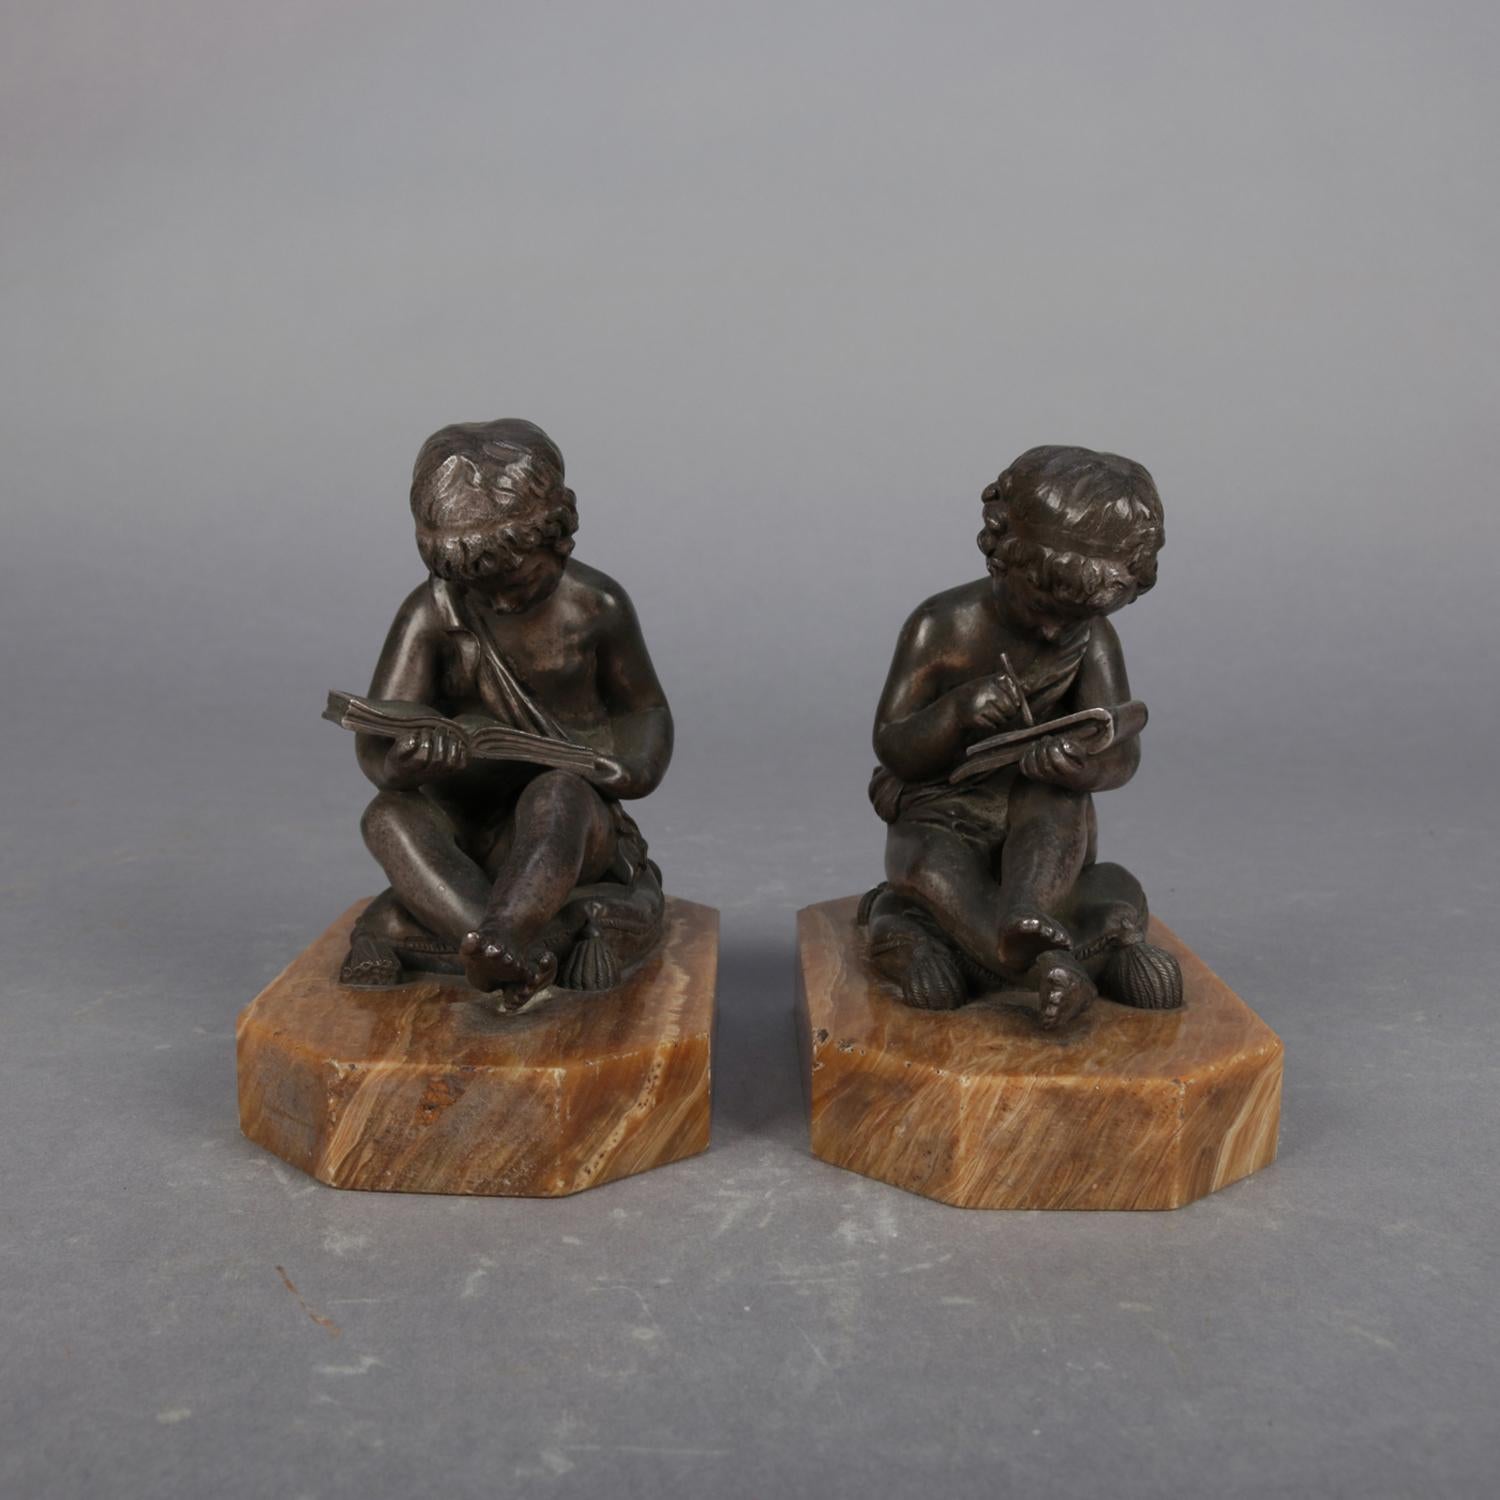 Antique pair of figural bronze sculpture bookends representing children, one reading and one writing while seated on tasselled cushions, signed Lemire (Charles Gabriel Lemire, French, 1741-1827) and bearing foundry stamp seal JOLLET et Cie et COLIN